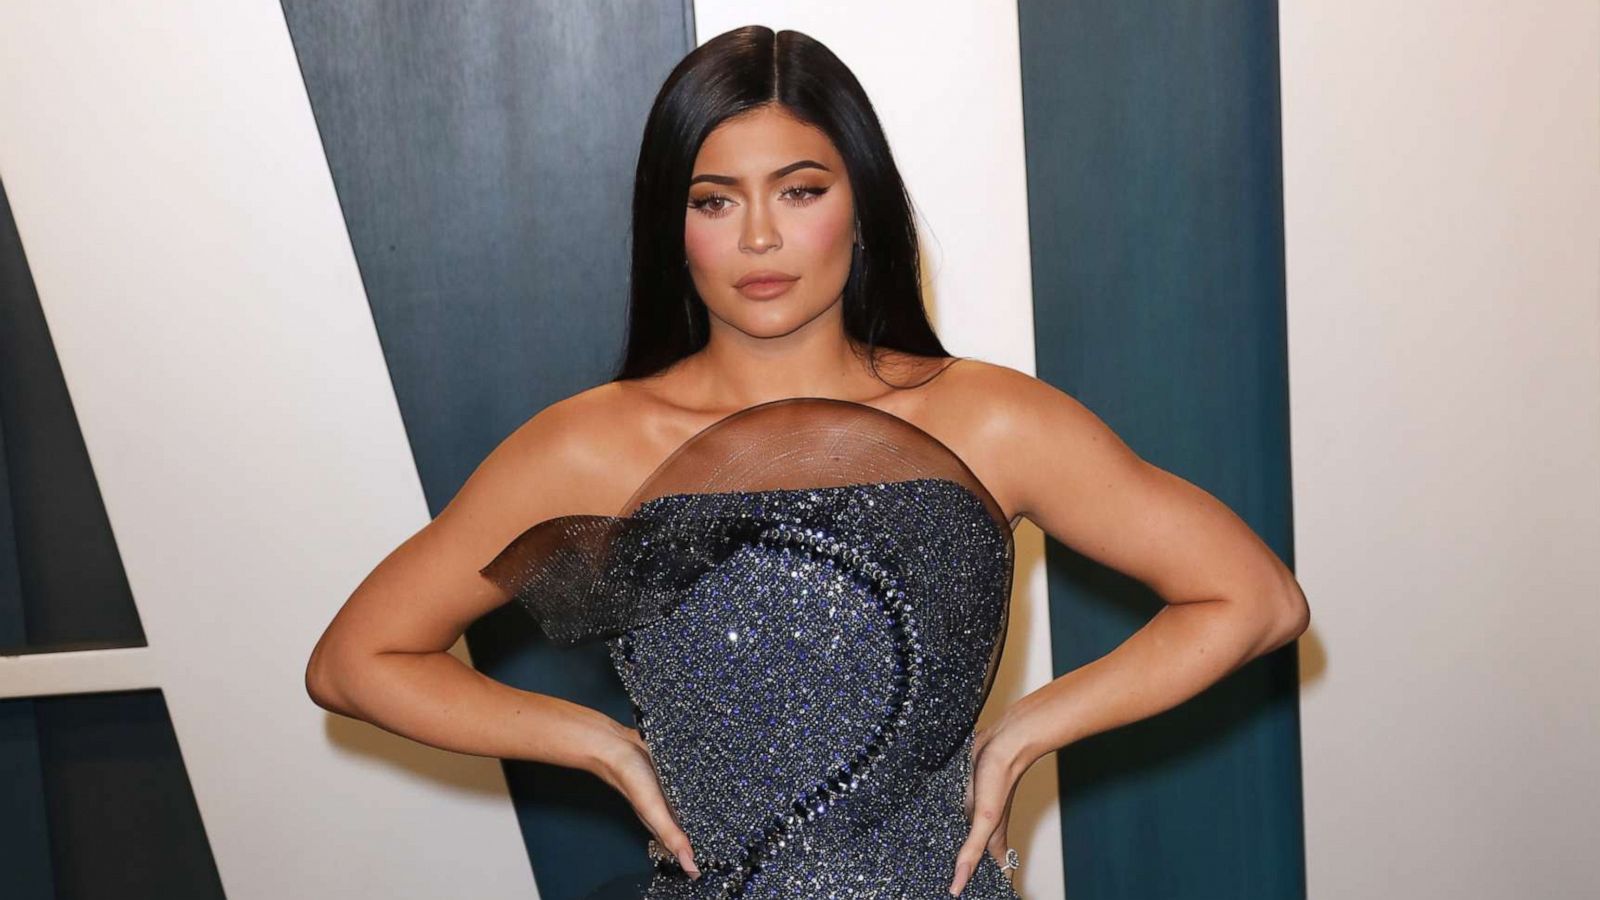 Kylie Jenner shares VERY stylish Monday morning glam look